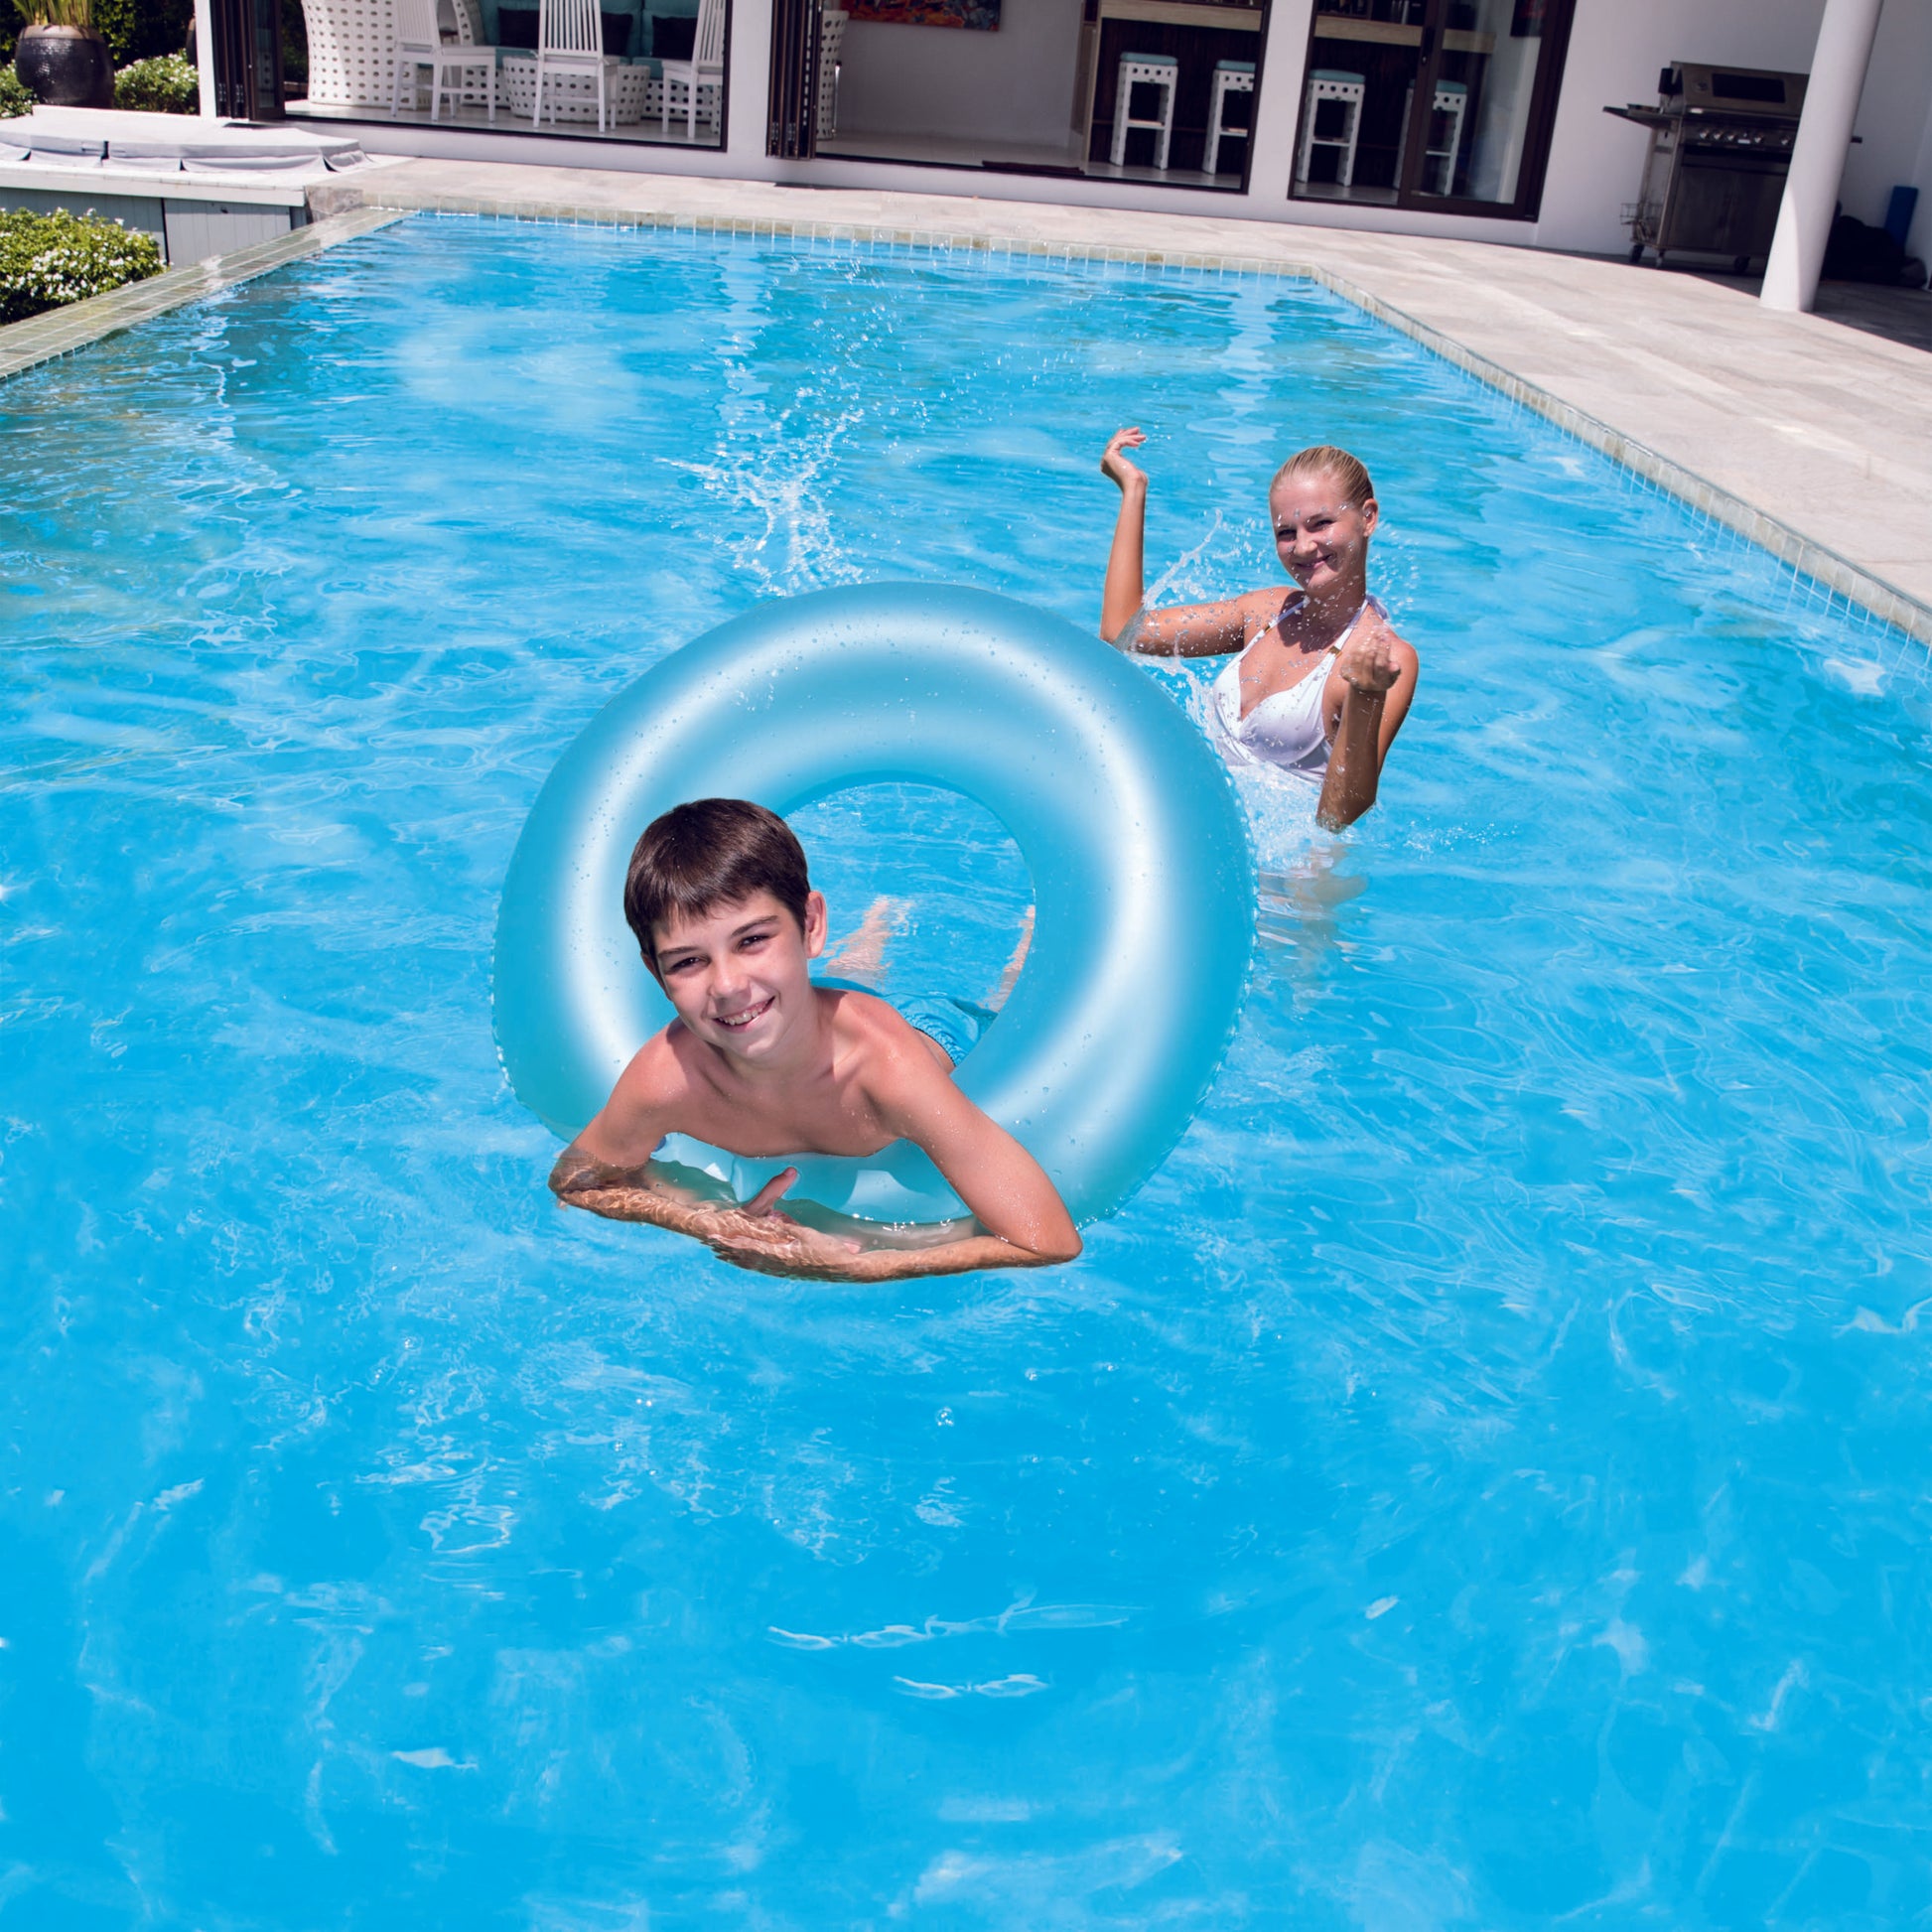 76cm Neon Swim Ring Inflatable Swim Rings Durable Tough Portable Lightweight Easy Inflate - Homeware Discounts